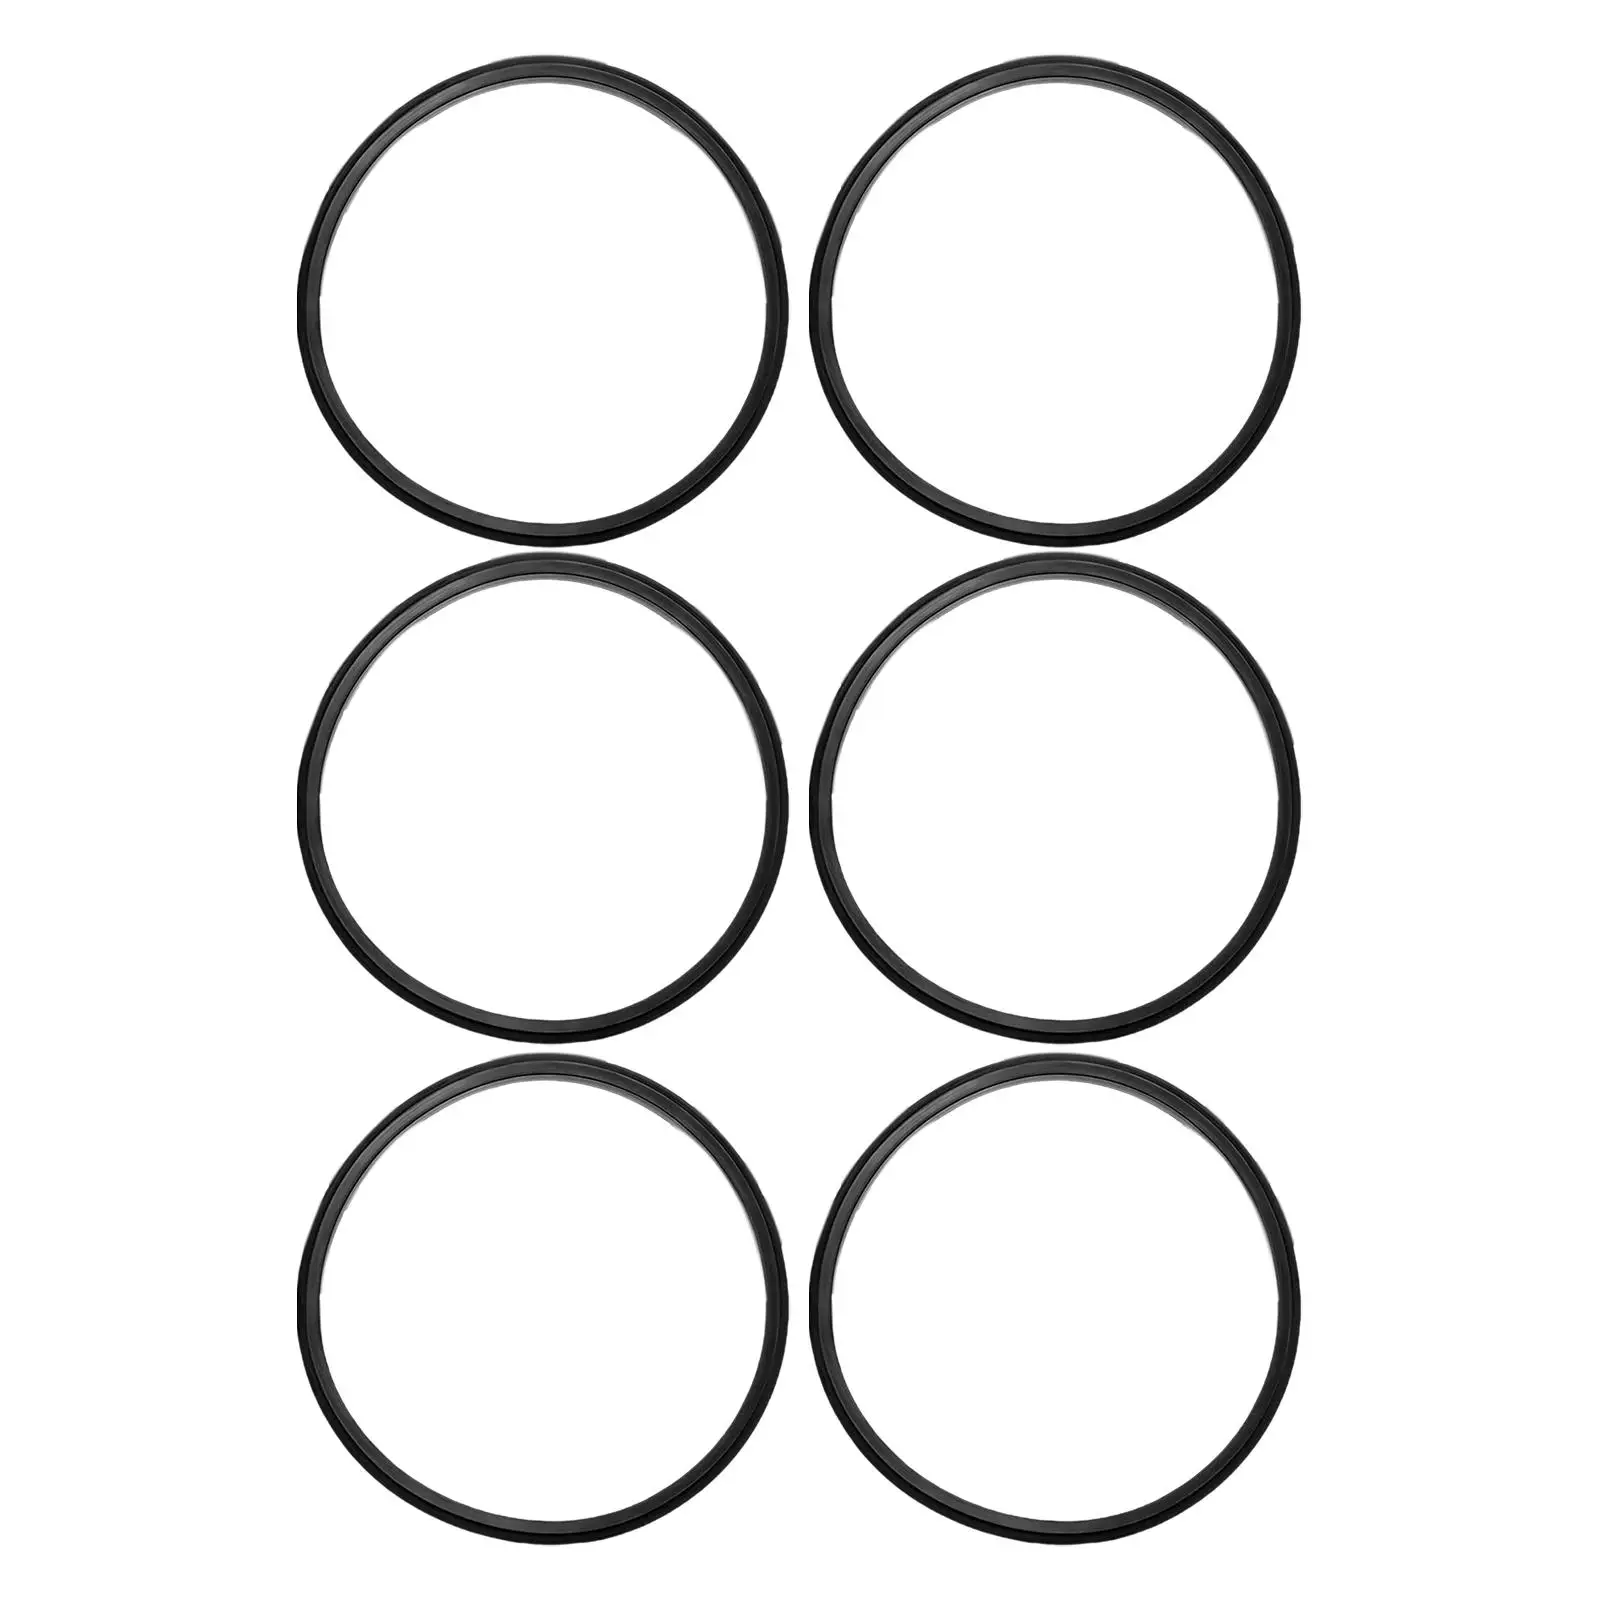 6x Silicone Jar Gasket Waterproof Pad Replacement Silicone Sealing Rings for